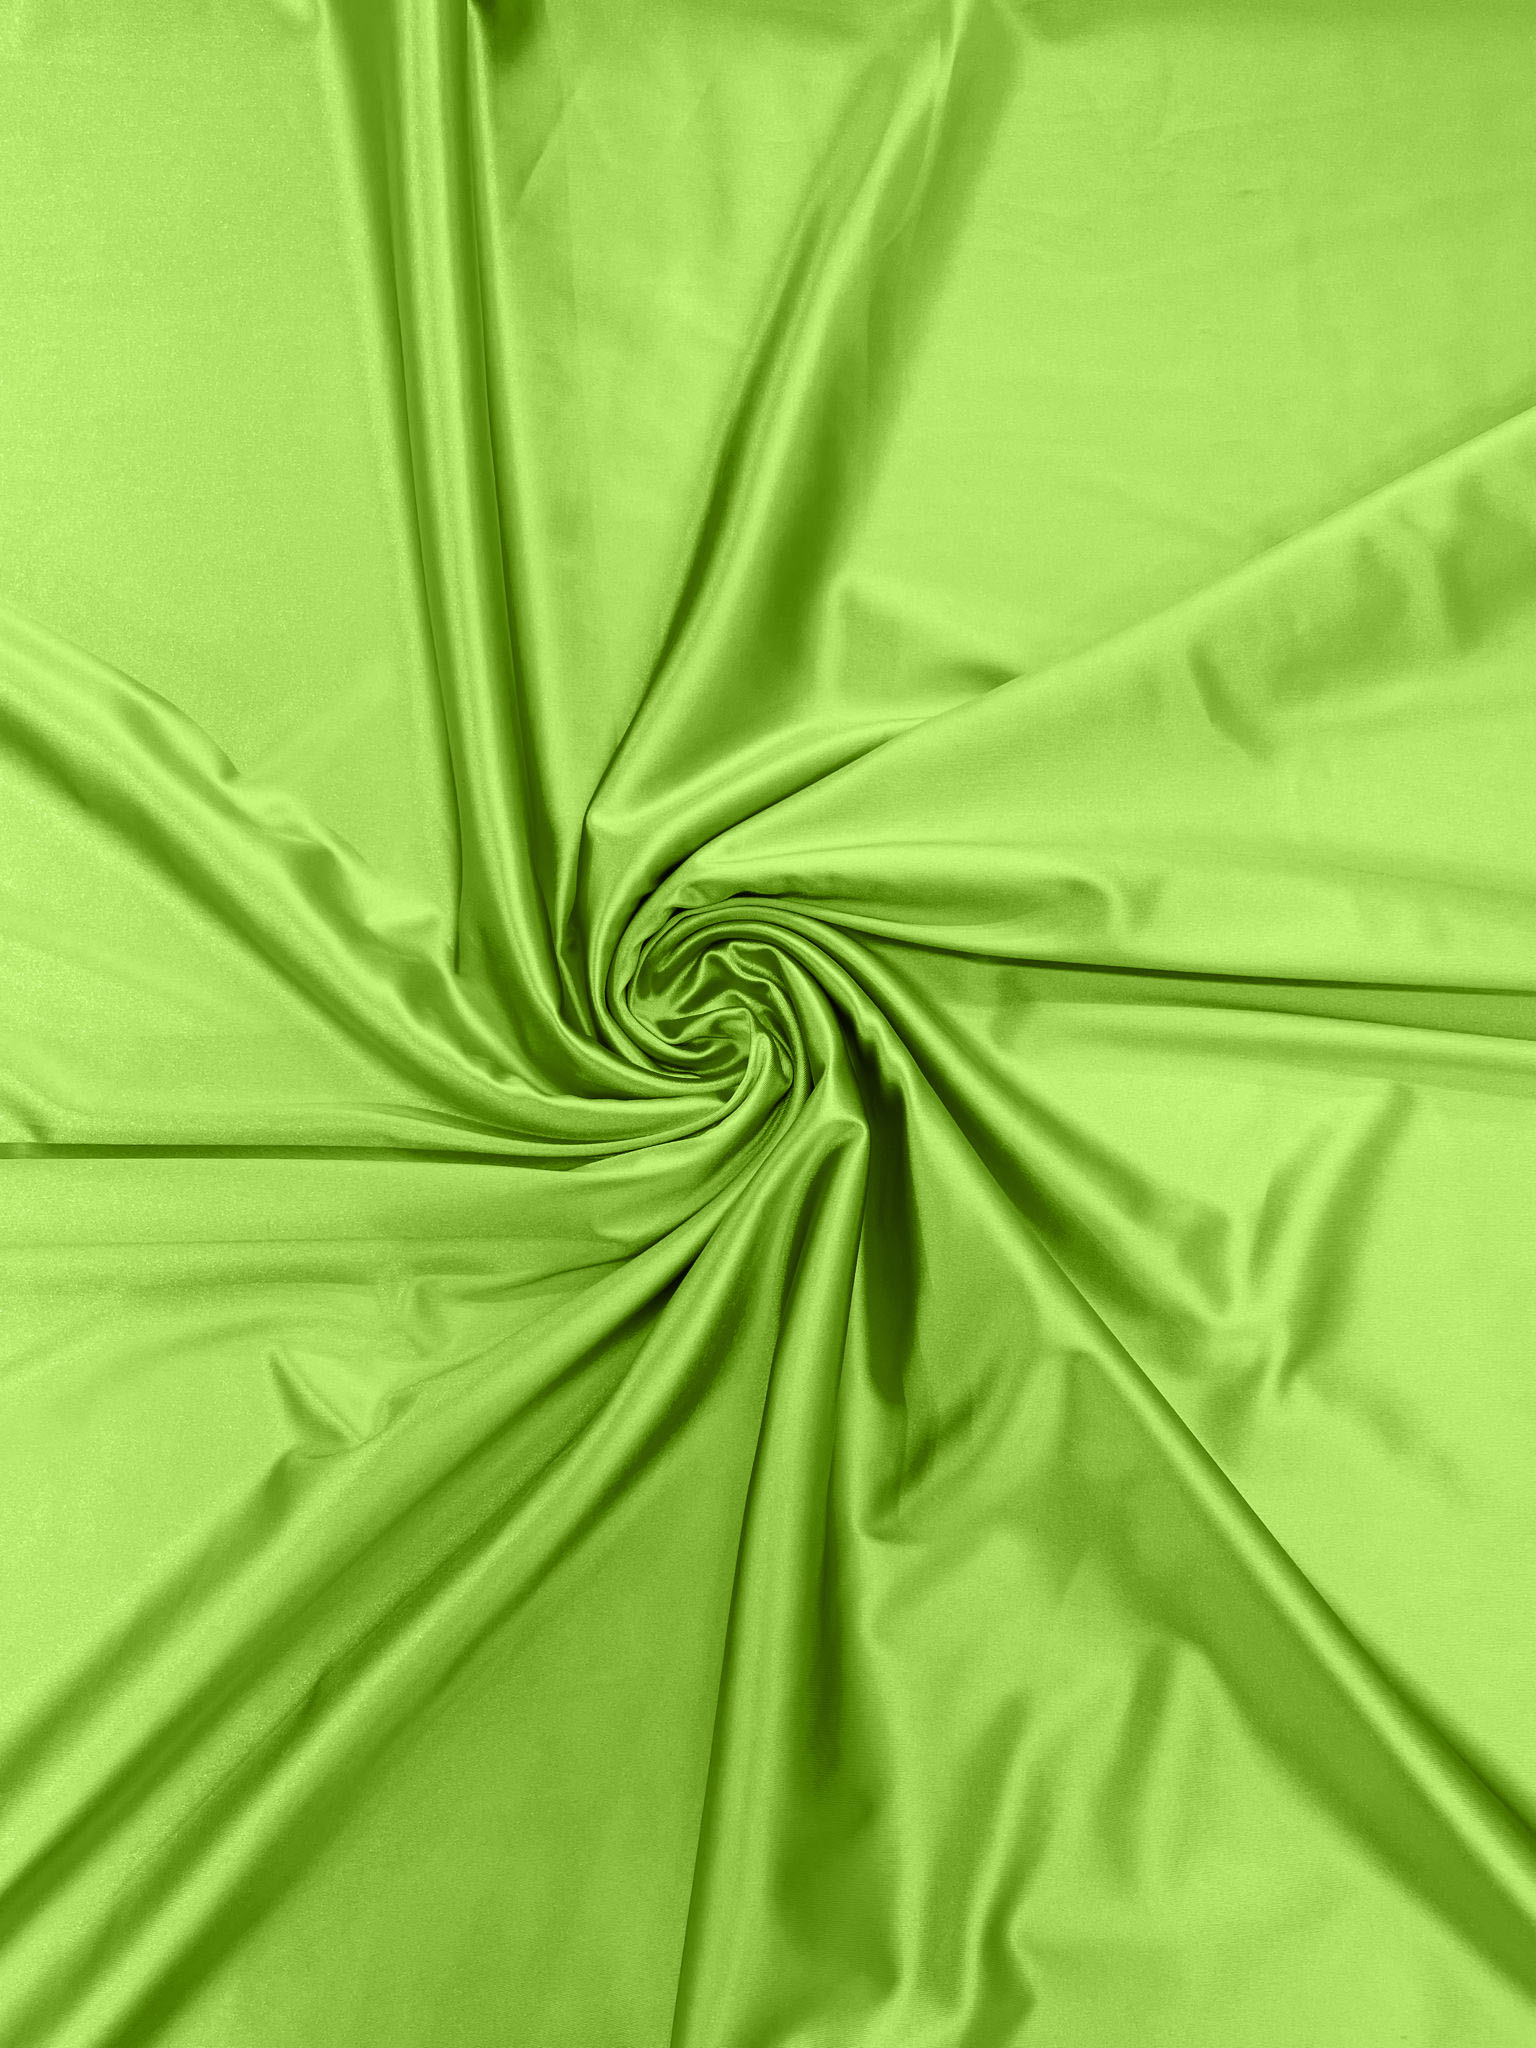 Neon Green Heavy Shiny Satin Stretch Spandex Fabric/58 Inches Wide/Prom/Wedding/Cosplays.